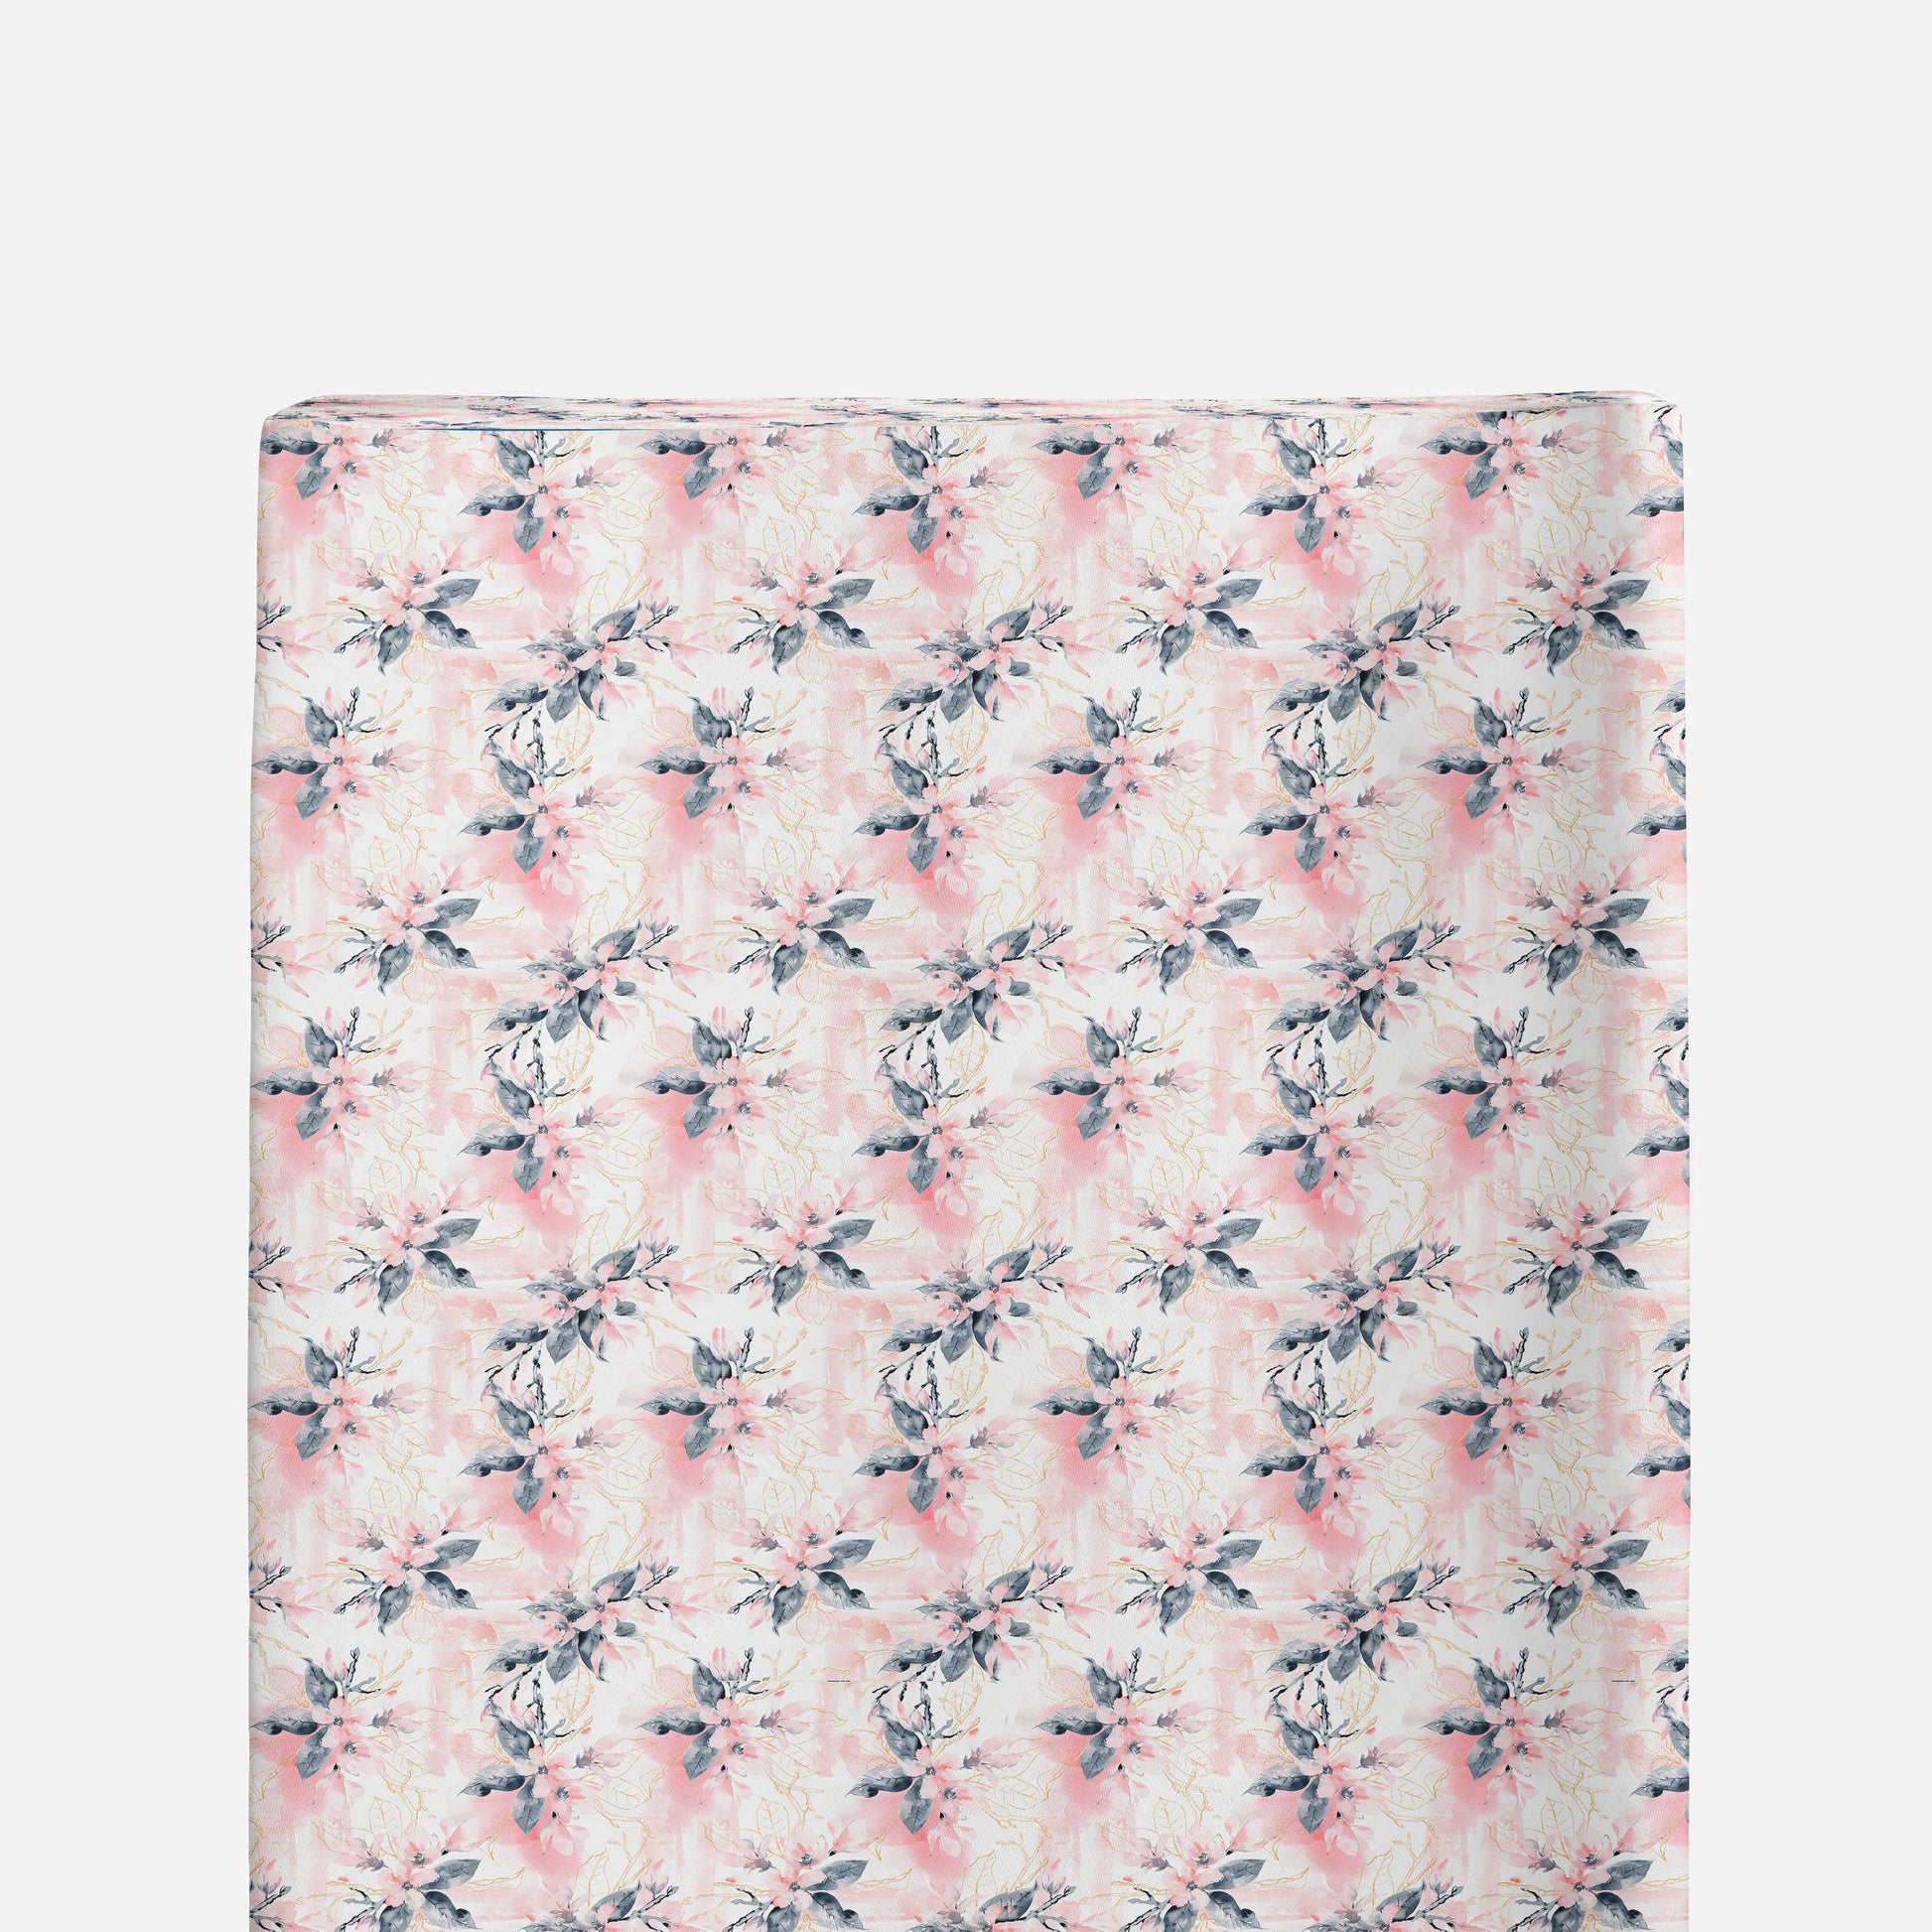 Changing Pad Cover | Pink and White Floral - One Kind Clothing, LLC